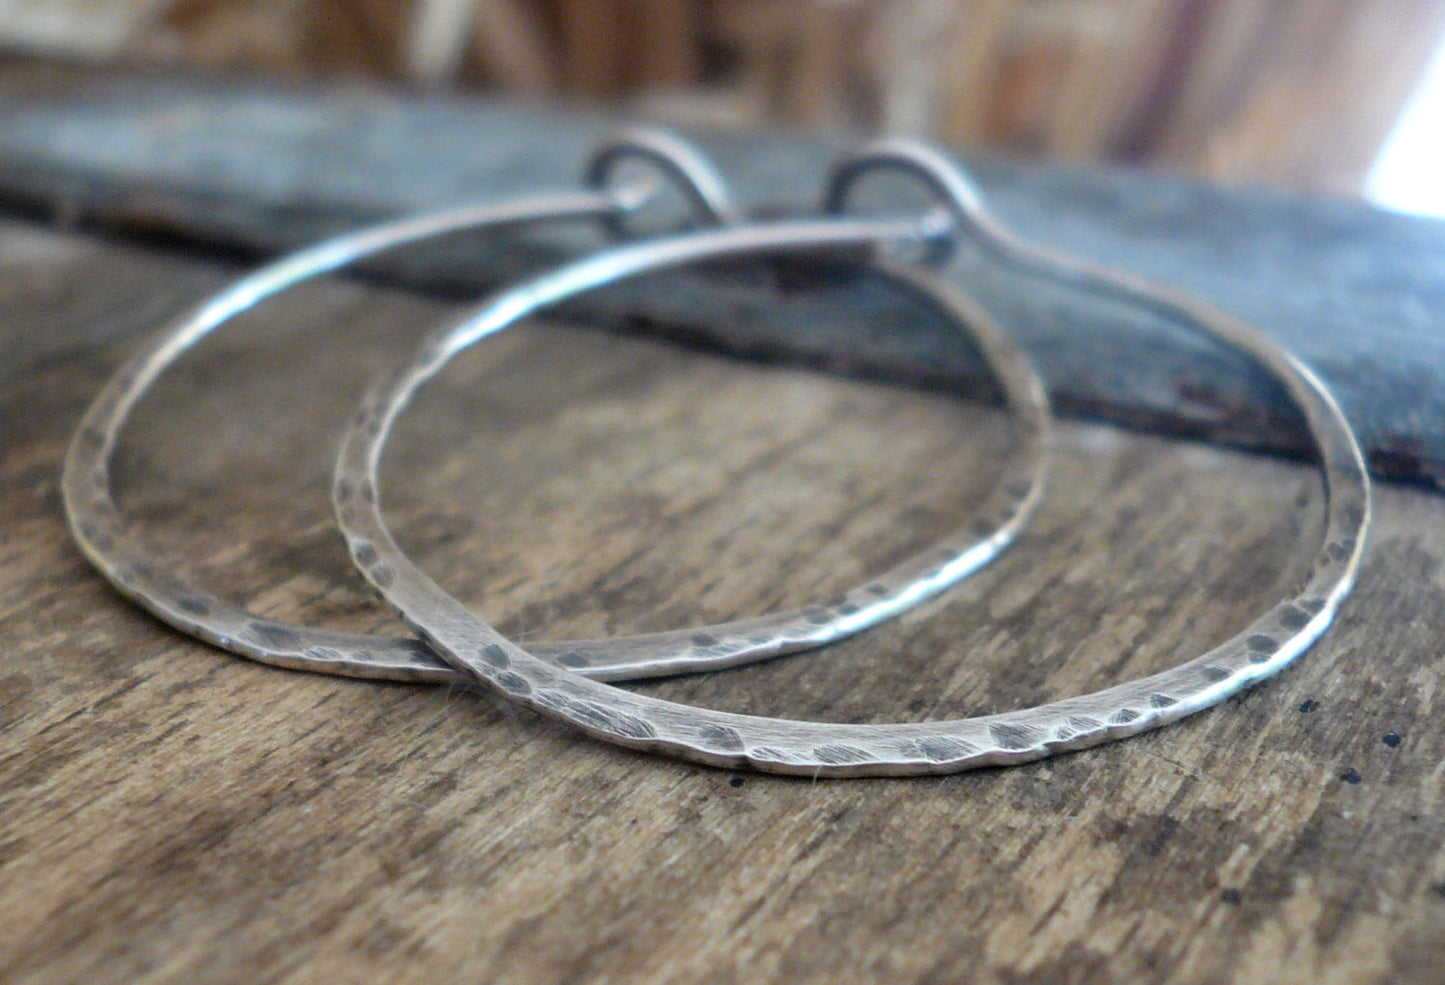 Mangly Hoops - Choice of 6 sizes. Handmade. Hammered. Oxidized Sterling Silver Hoop Earrings